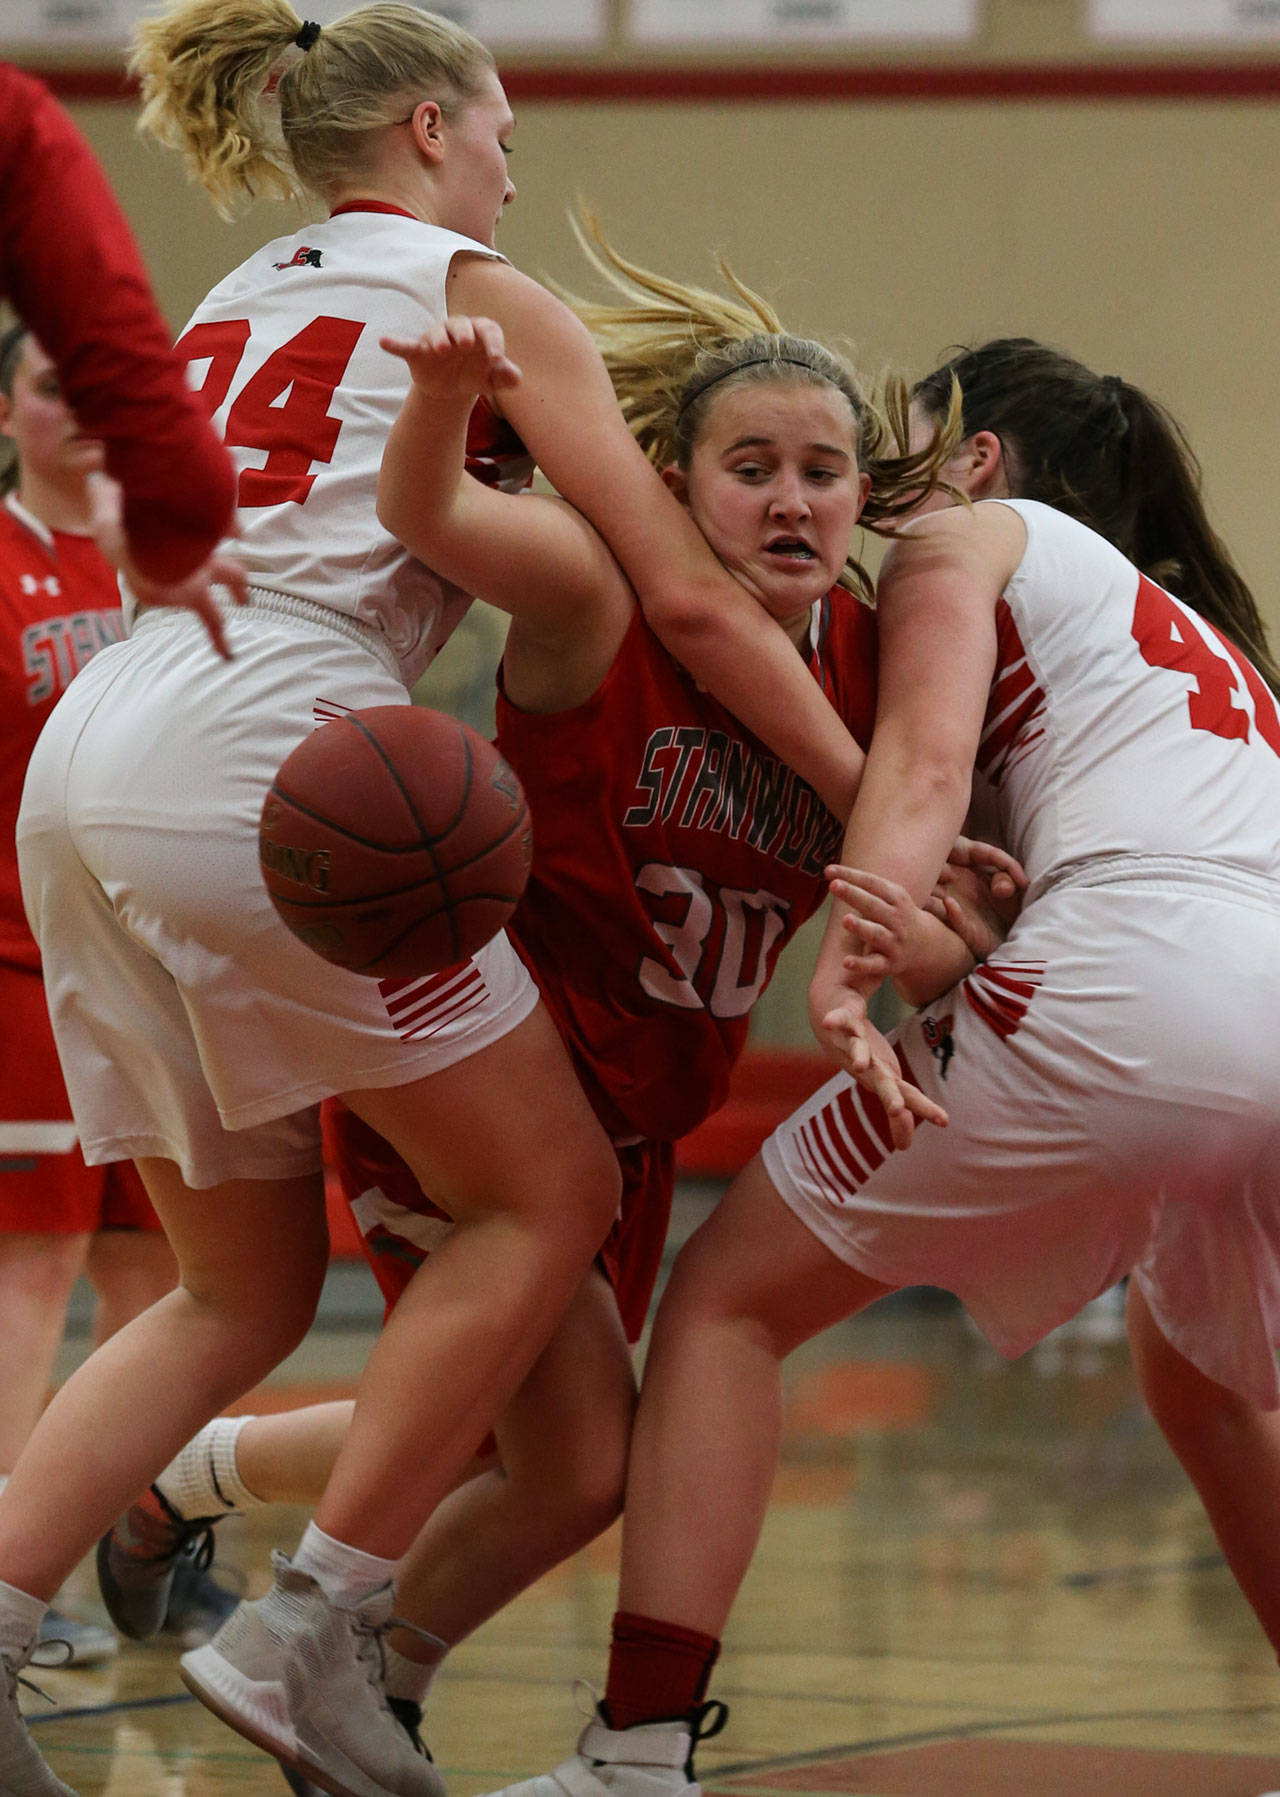 Stanwood’s Madeline Larson (center) tries to split the double team set by Snohomish’s Kaylin Beckman (left) and Courtney Perry (right) during a Wesco 3A girls basketball game Thursday in Snohomish. Snohomish (10-6, 9-1 Wesco 3A) locked down Stanwood (9-7, 6-4) during an 18-4 second quarter on its way to its fourth straight win. Maya DuChesne scored a game-high 16 poitns for the Panthers. (Kevin Clark / The Herald)